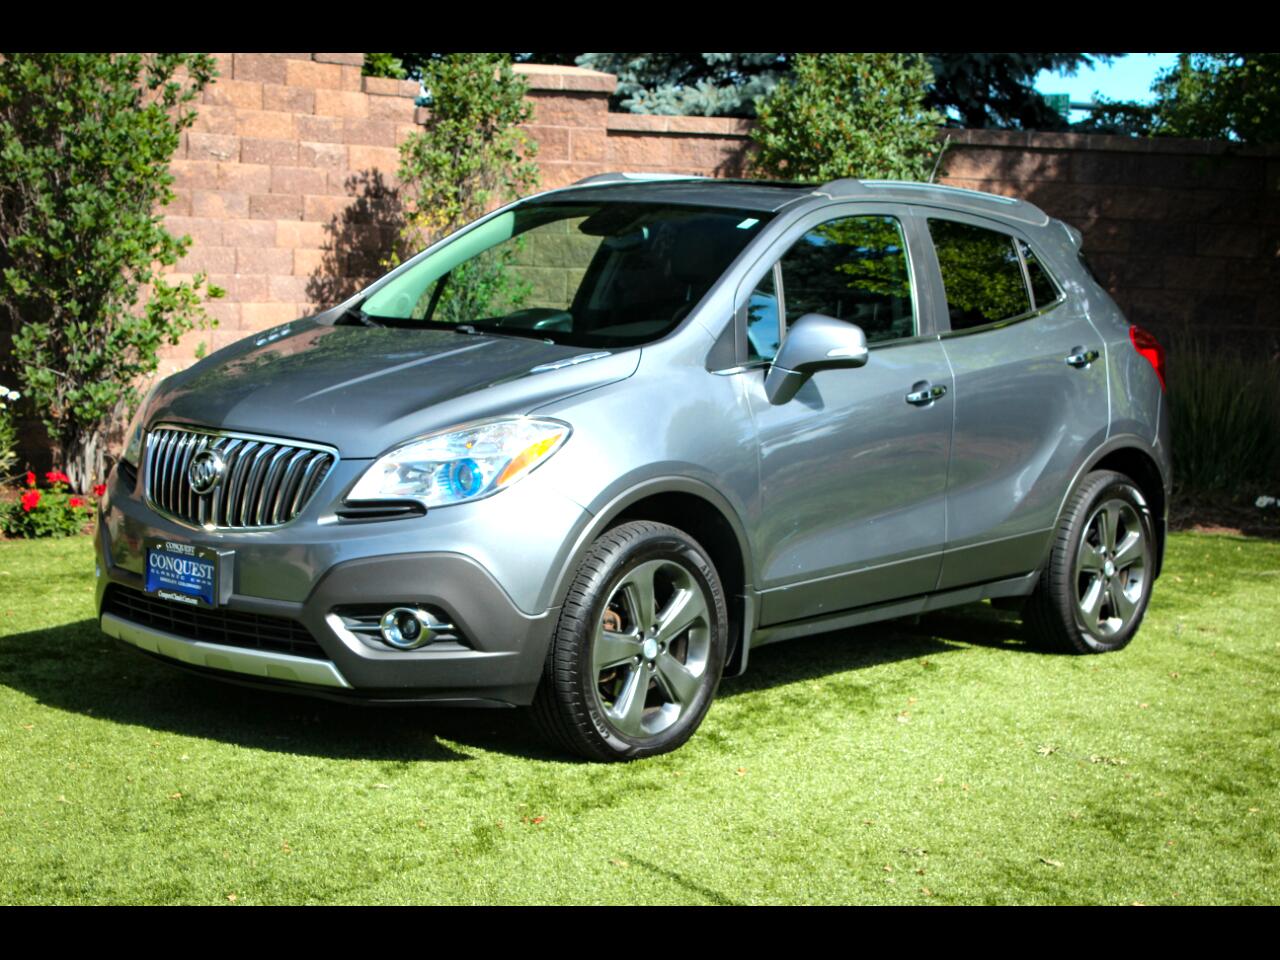 Buick Encore Leather AWD 2014